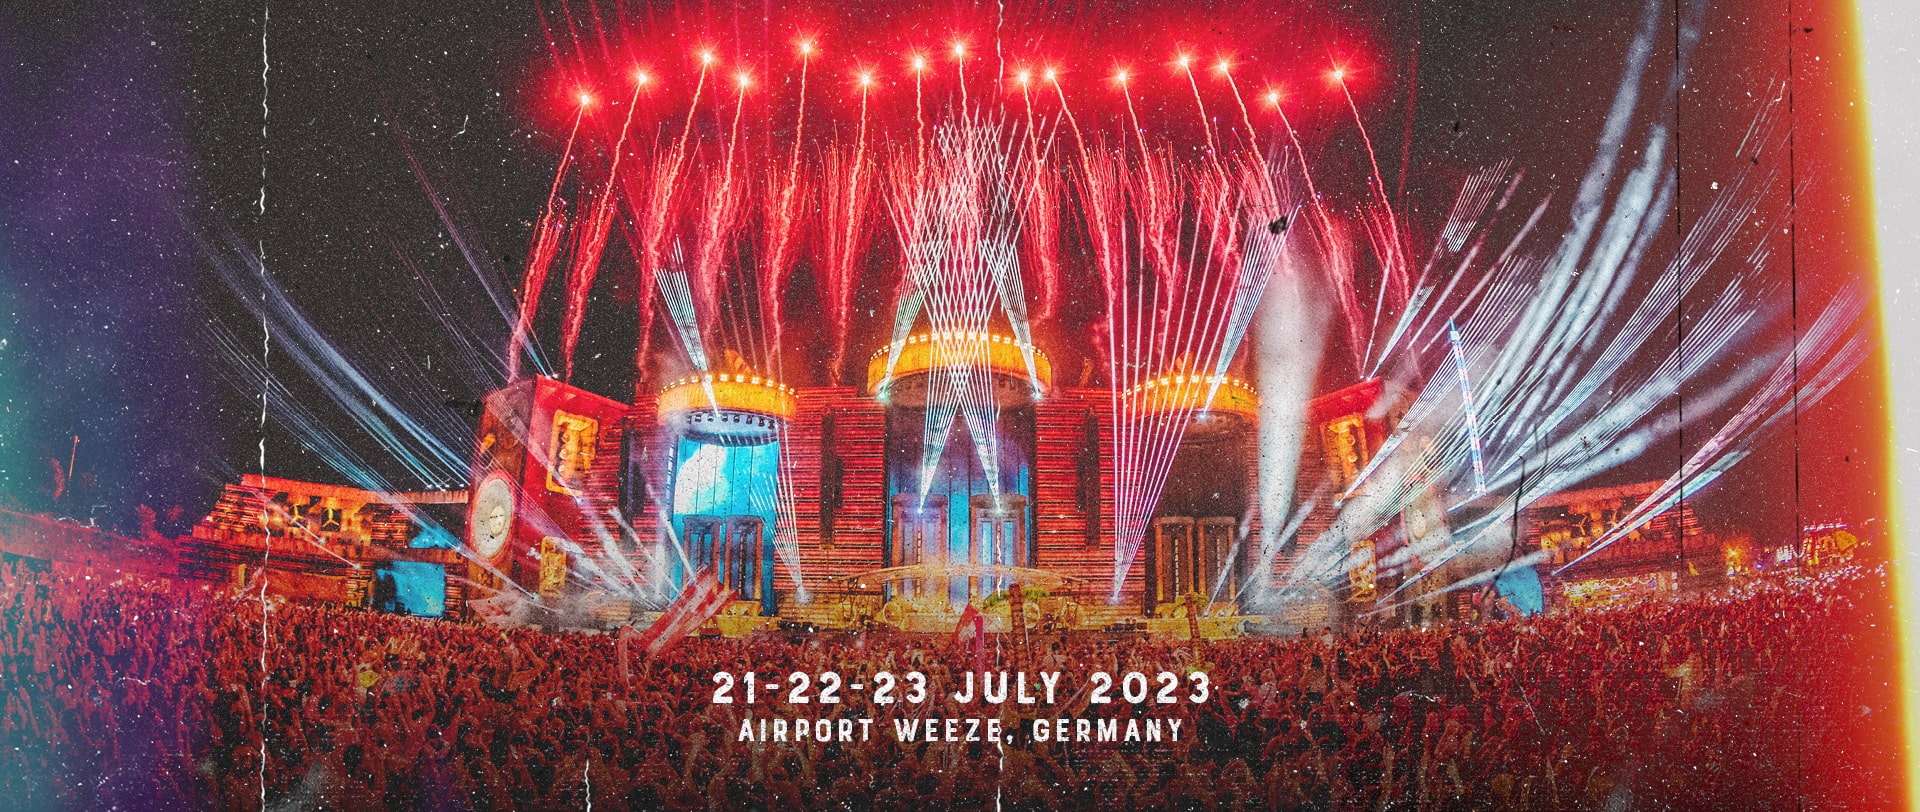 PAROOKAVILLE to premiere global star Kygo at Weeze